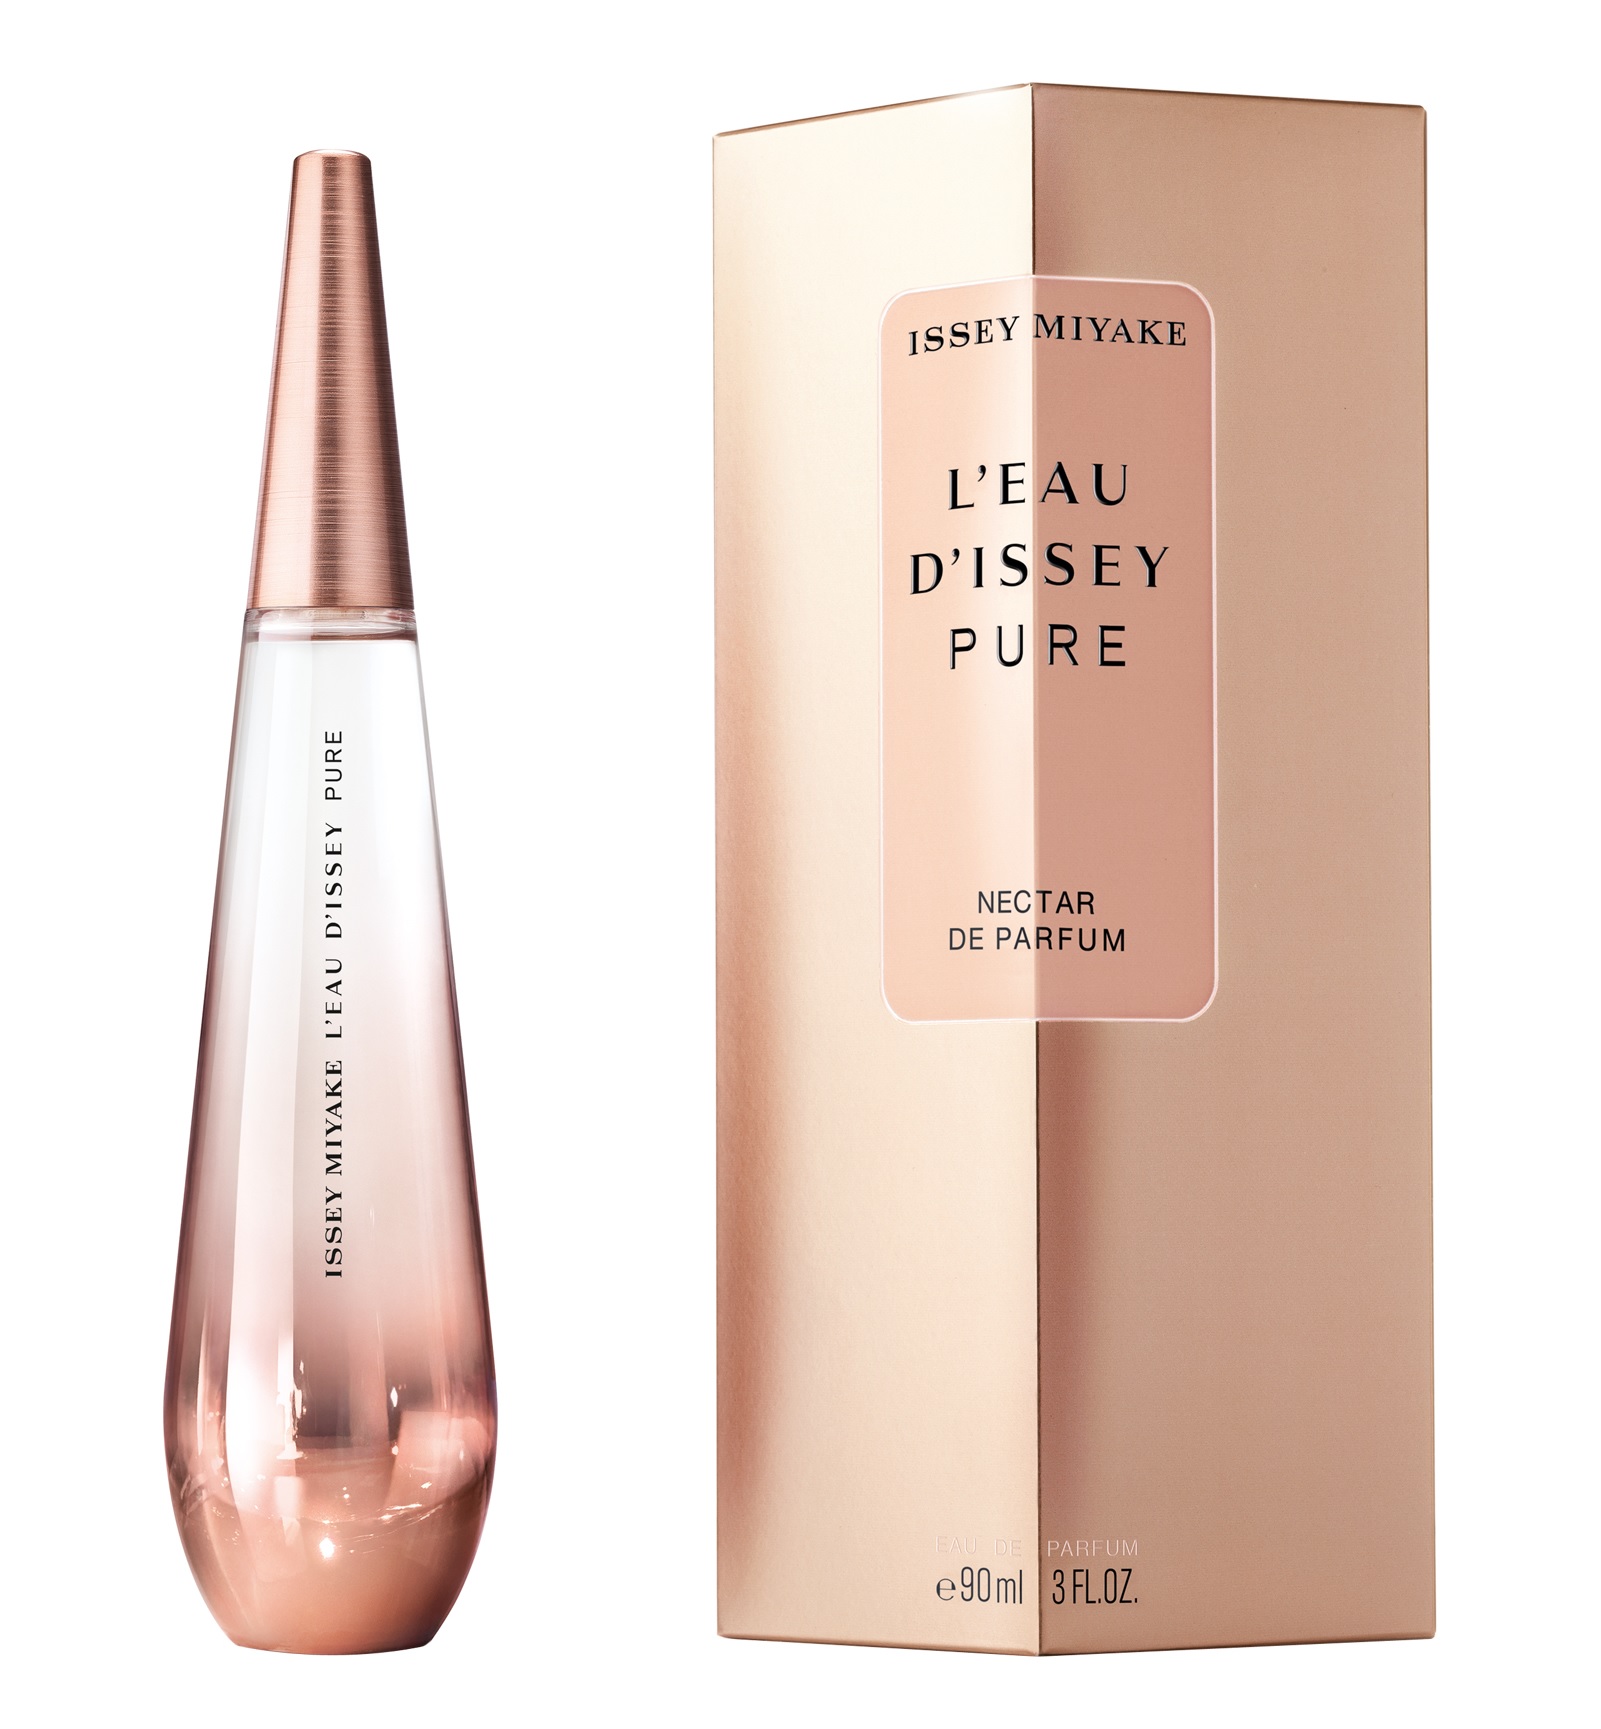 NEW: Issey Miyake - L'Eau d'Issey Pure Nectar de Parfum For Women!